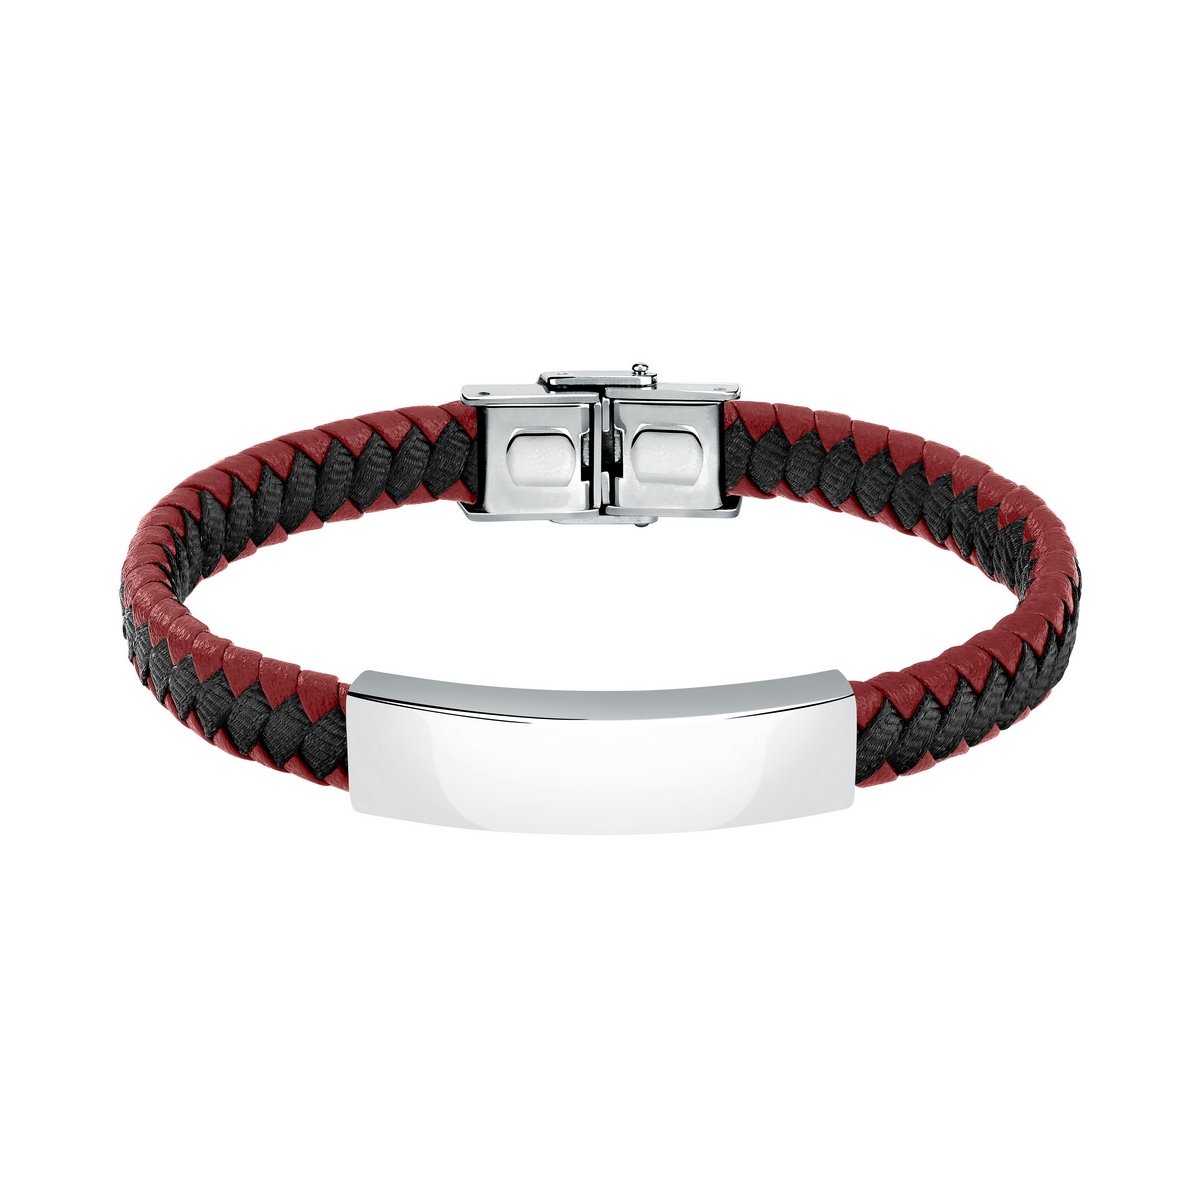 SECTOR BANDY BRACELET WITH RED LEATHER AND BACK NYLON 21CM